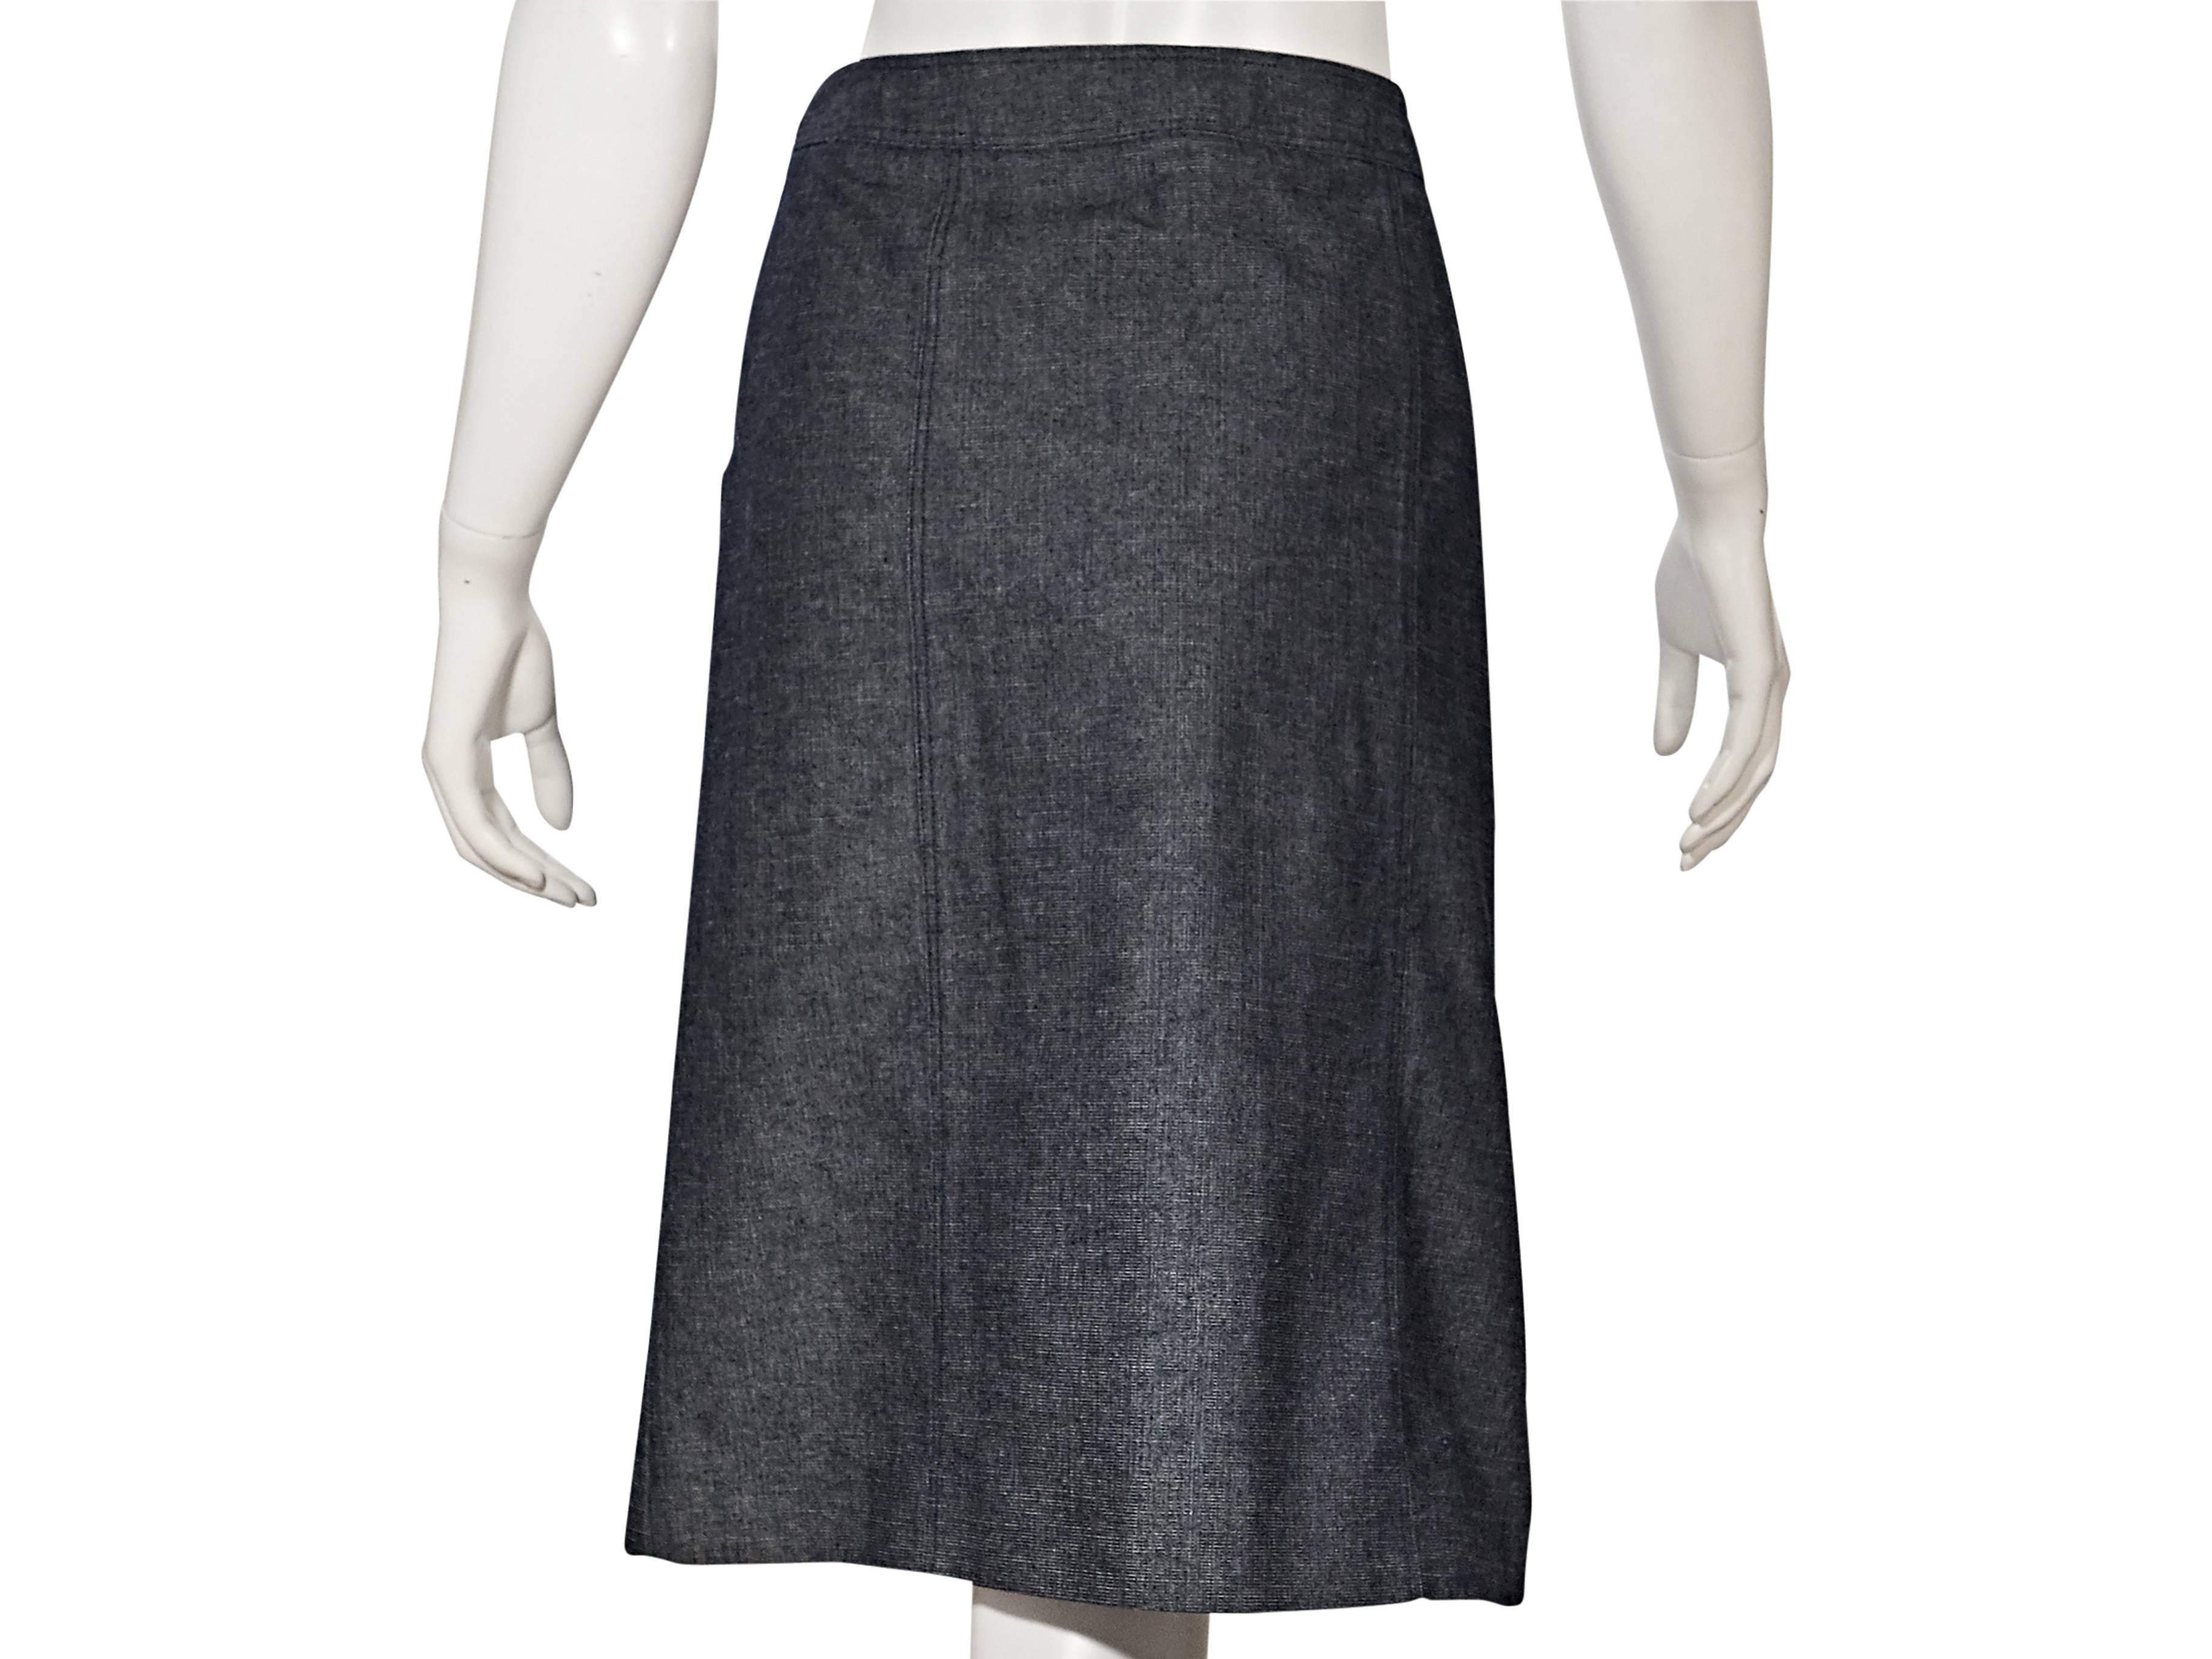 Product details:  ﻿Vintage denim A-line skirt by Chanel.  Banded waist.  Concealed side zip closure. 
Condition: Very good. 